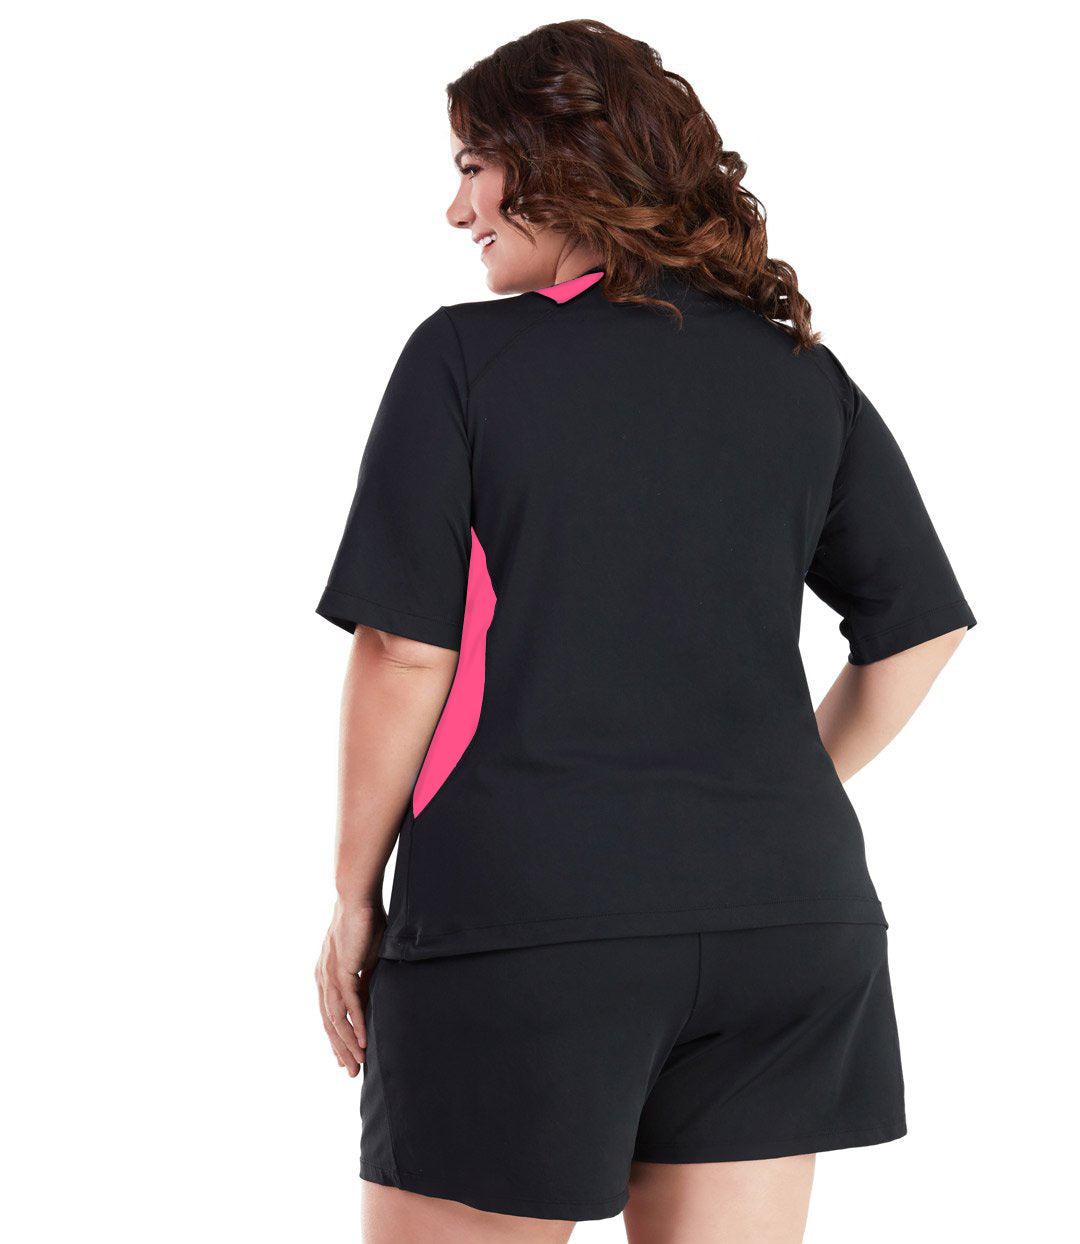 Plus size woman, back view, wearing AquaSport Colorblock Swim Tee Pink and Black. Pink colorblocking on waist and shoulders. Long cover short sleeves meeting at the elbow. 